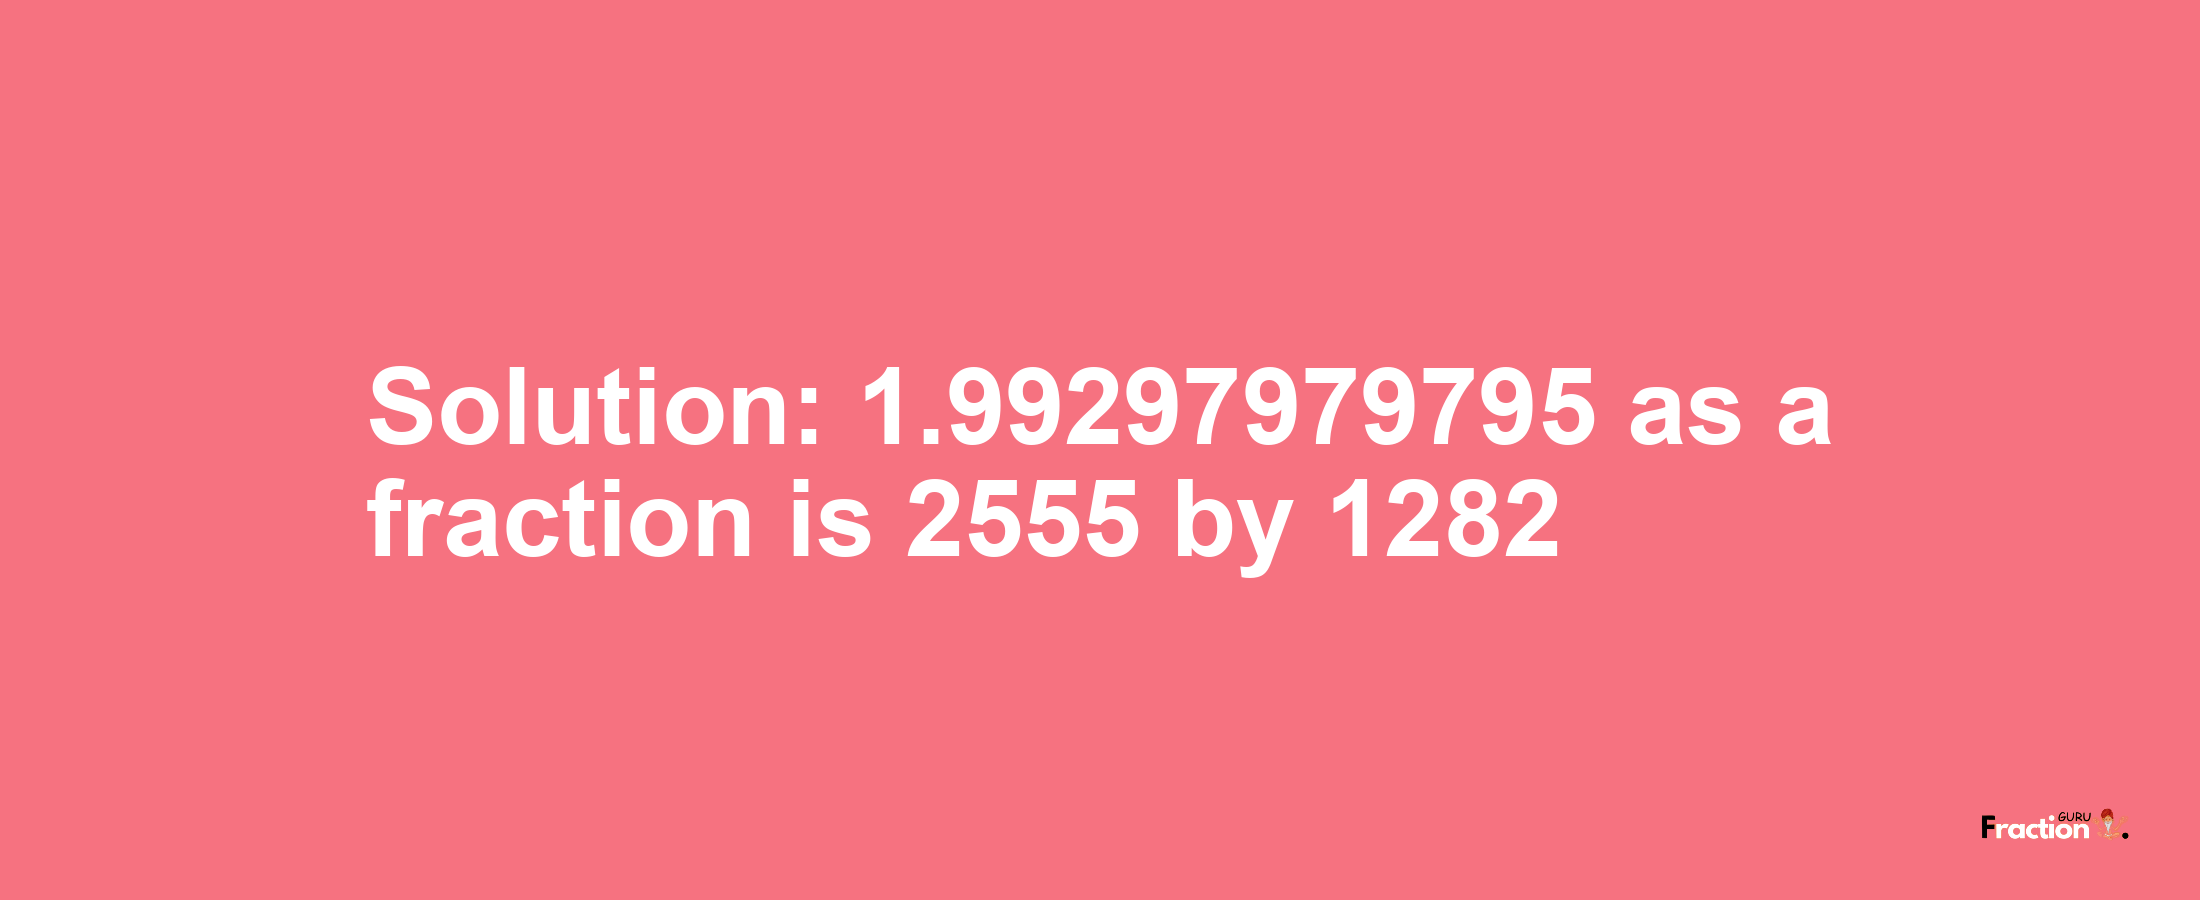 Solution:1.99297979795 as a fraction is 2555/1282